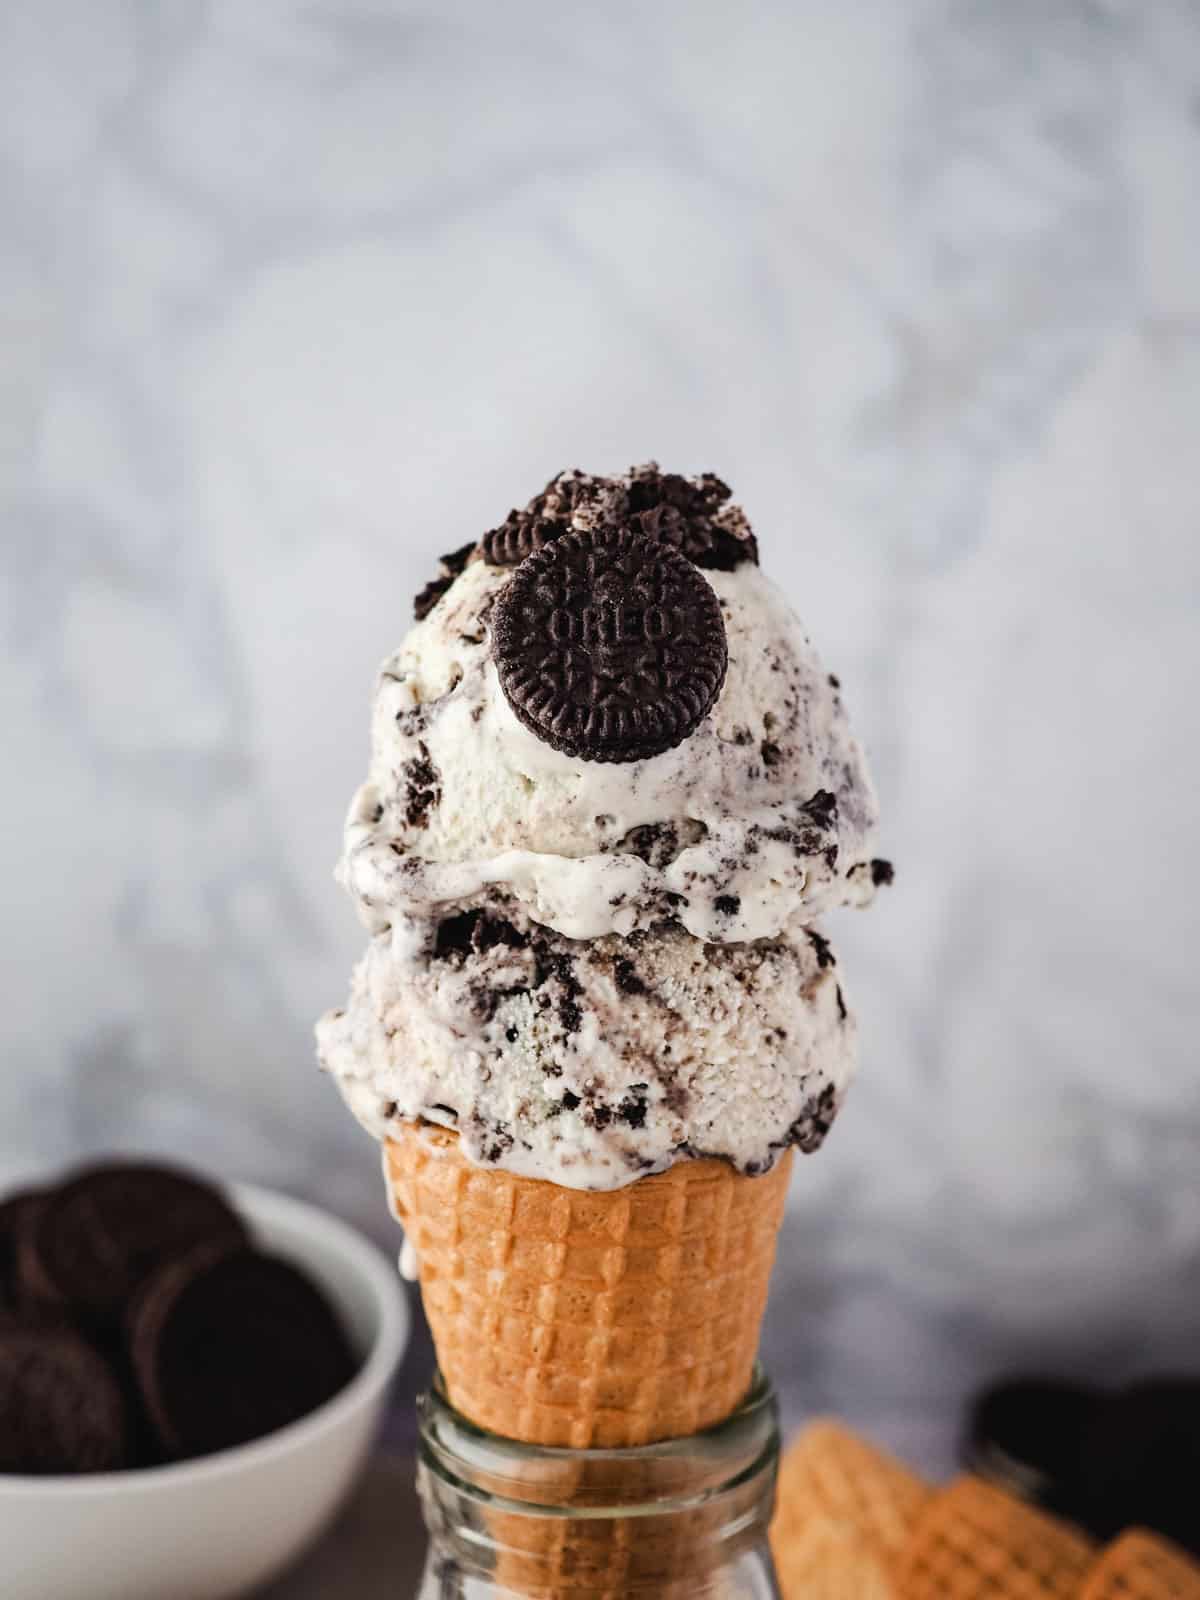 Two scoops of Oreo ice cream in a cone, garnished with a mini Oreo and Oreos in the background.